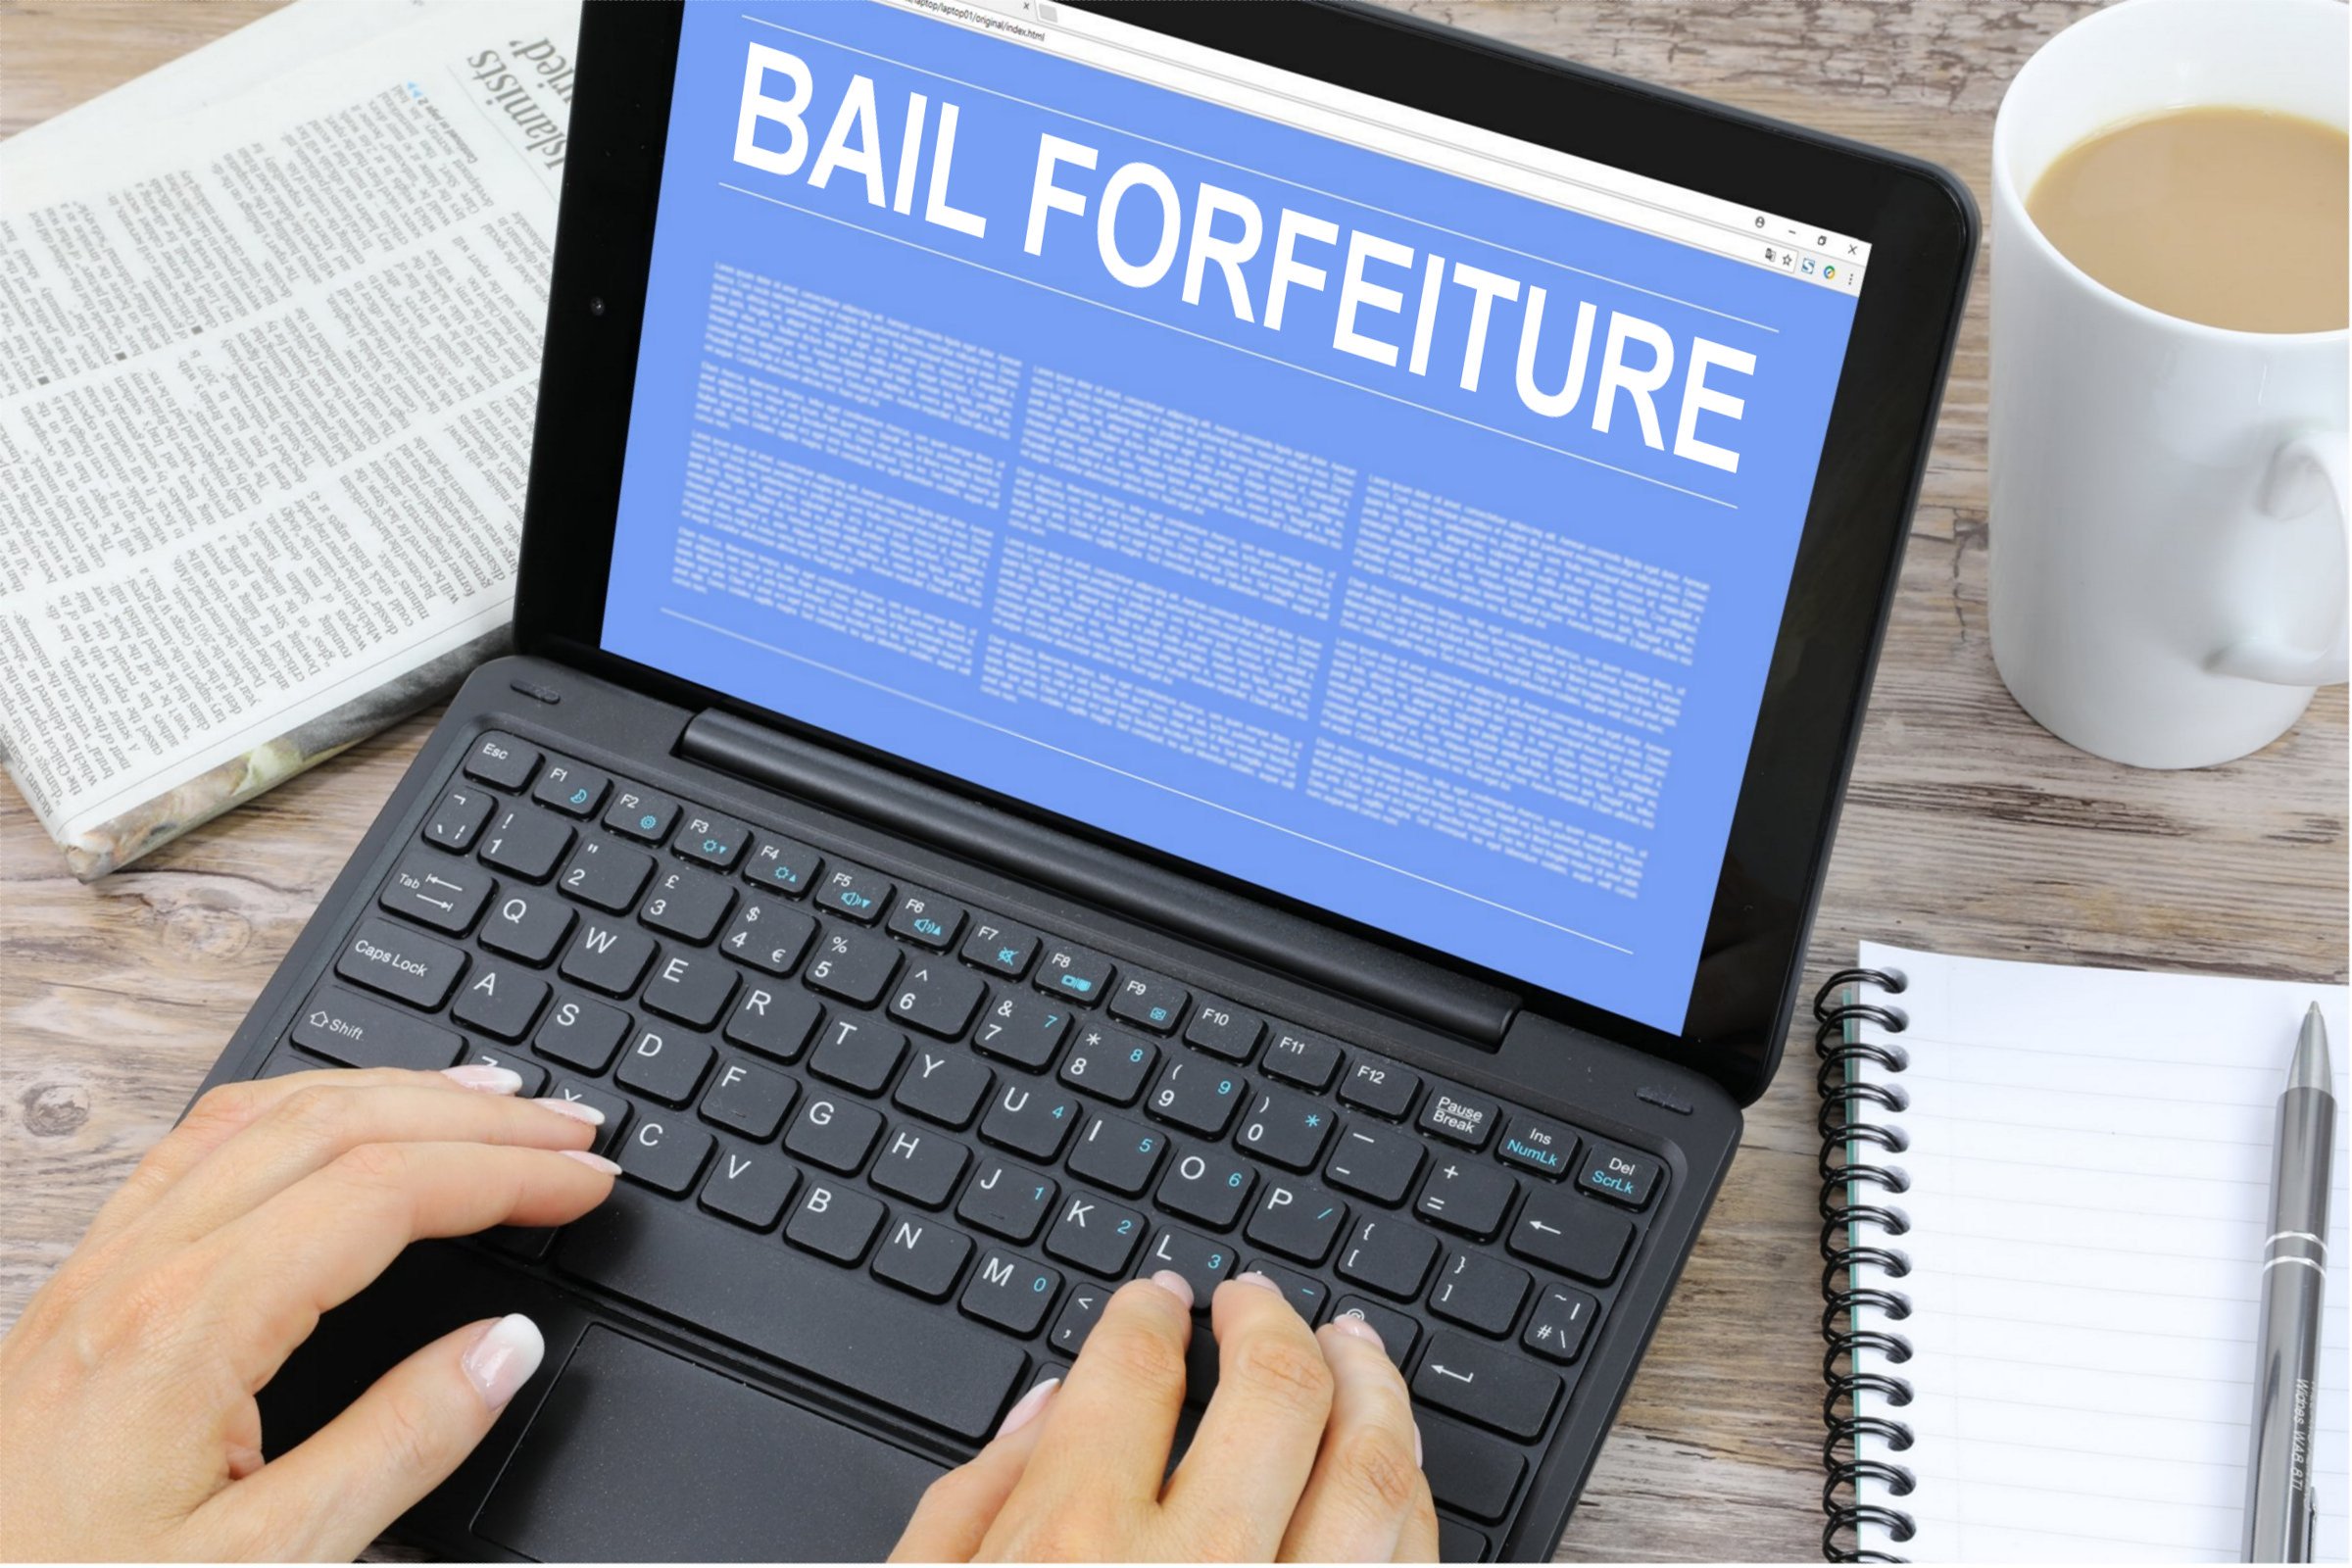 Bail Forfeiture